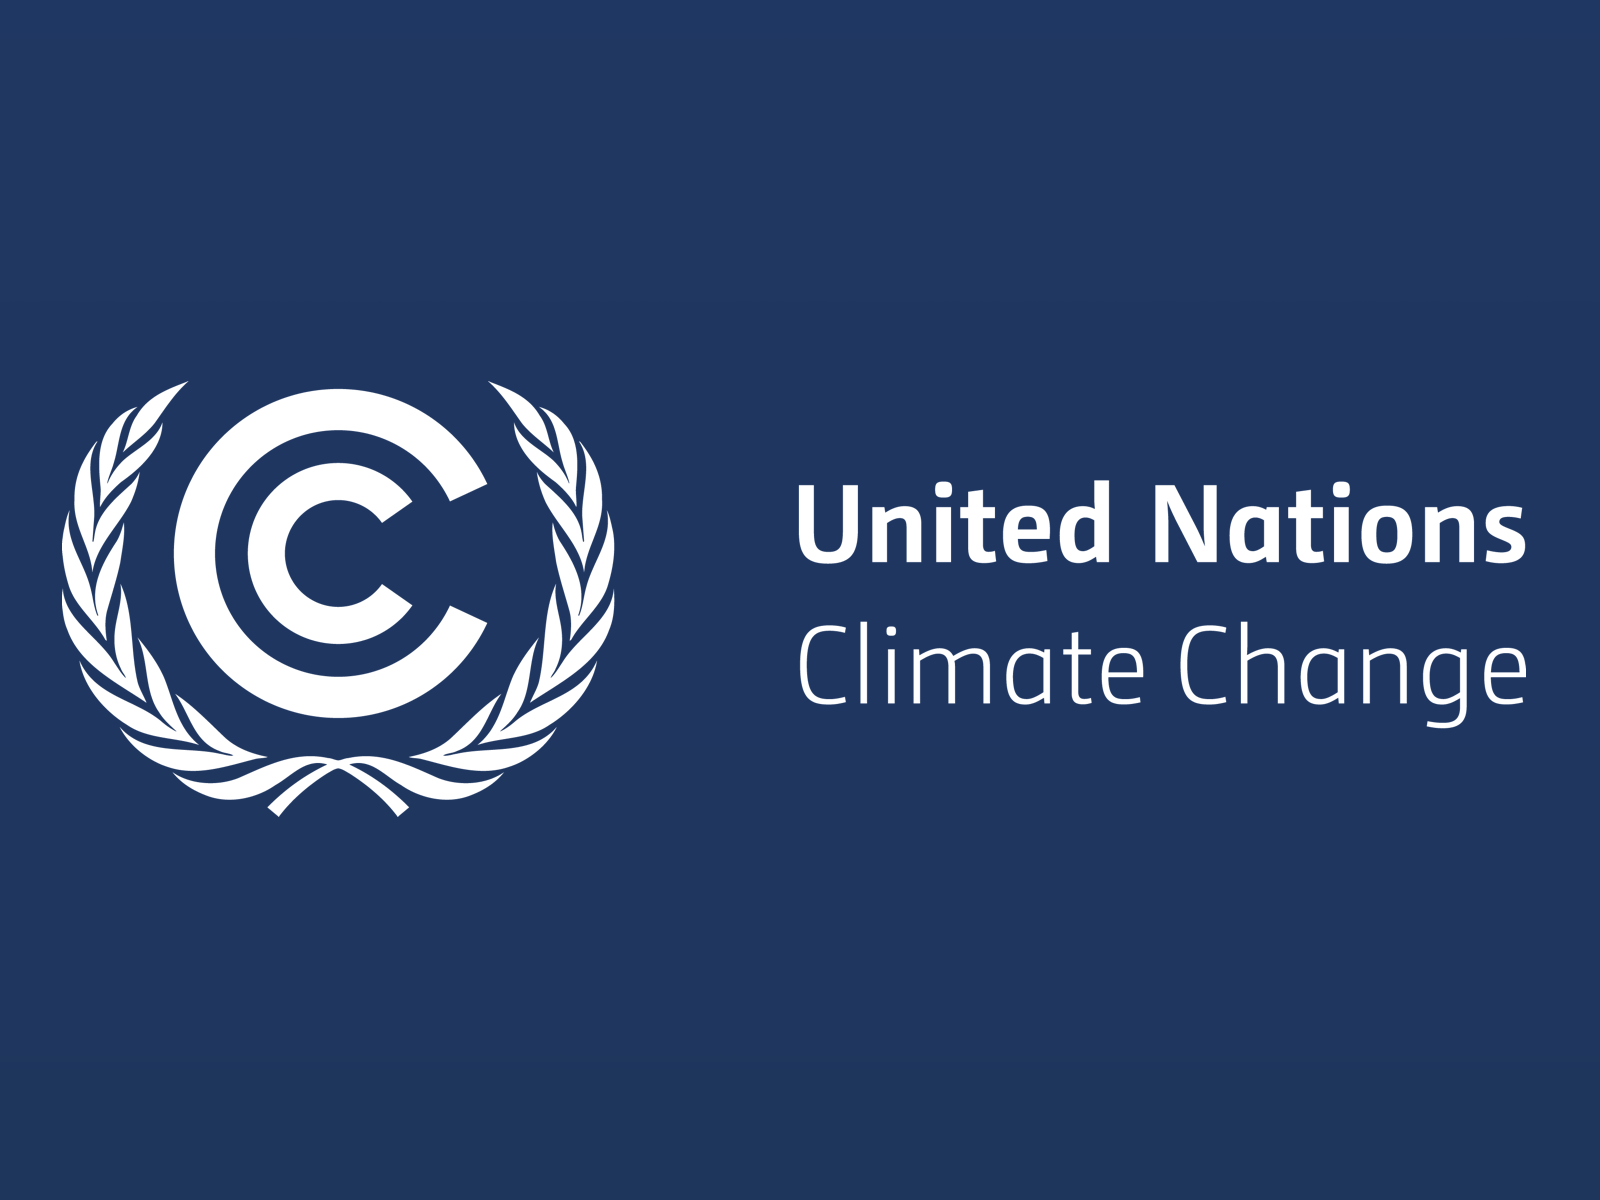 United Nations Climate Change, "2030 Breakthroughs"